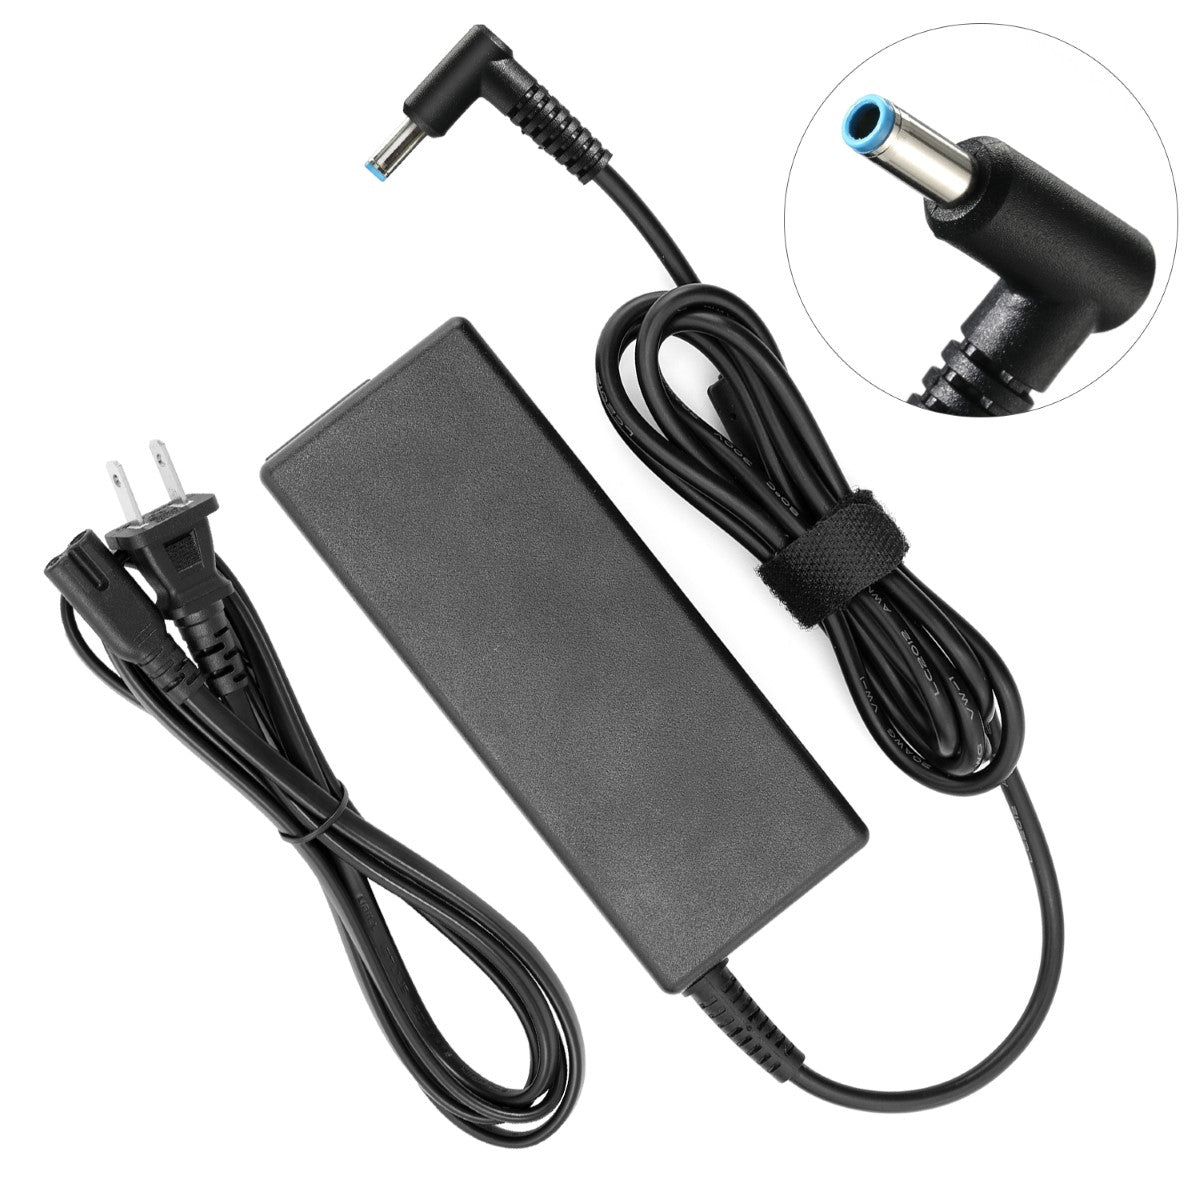 AC Adapter Charger for HP ENVY x2 15-c001dx Notebook.